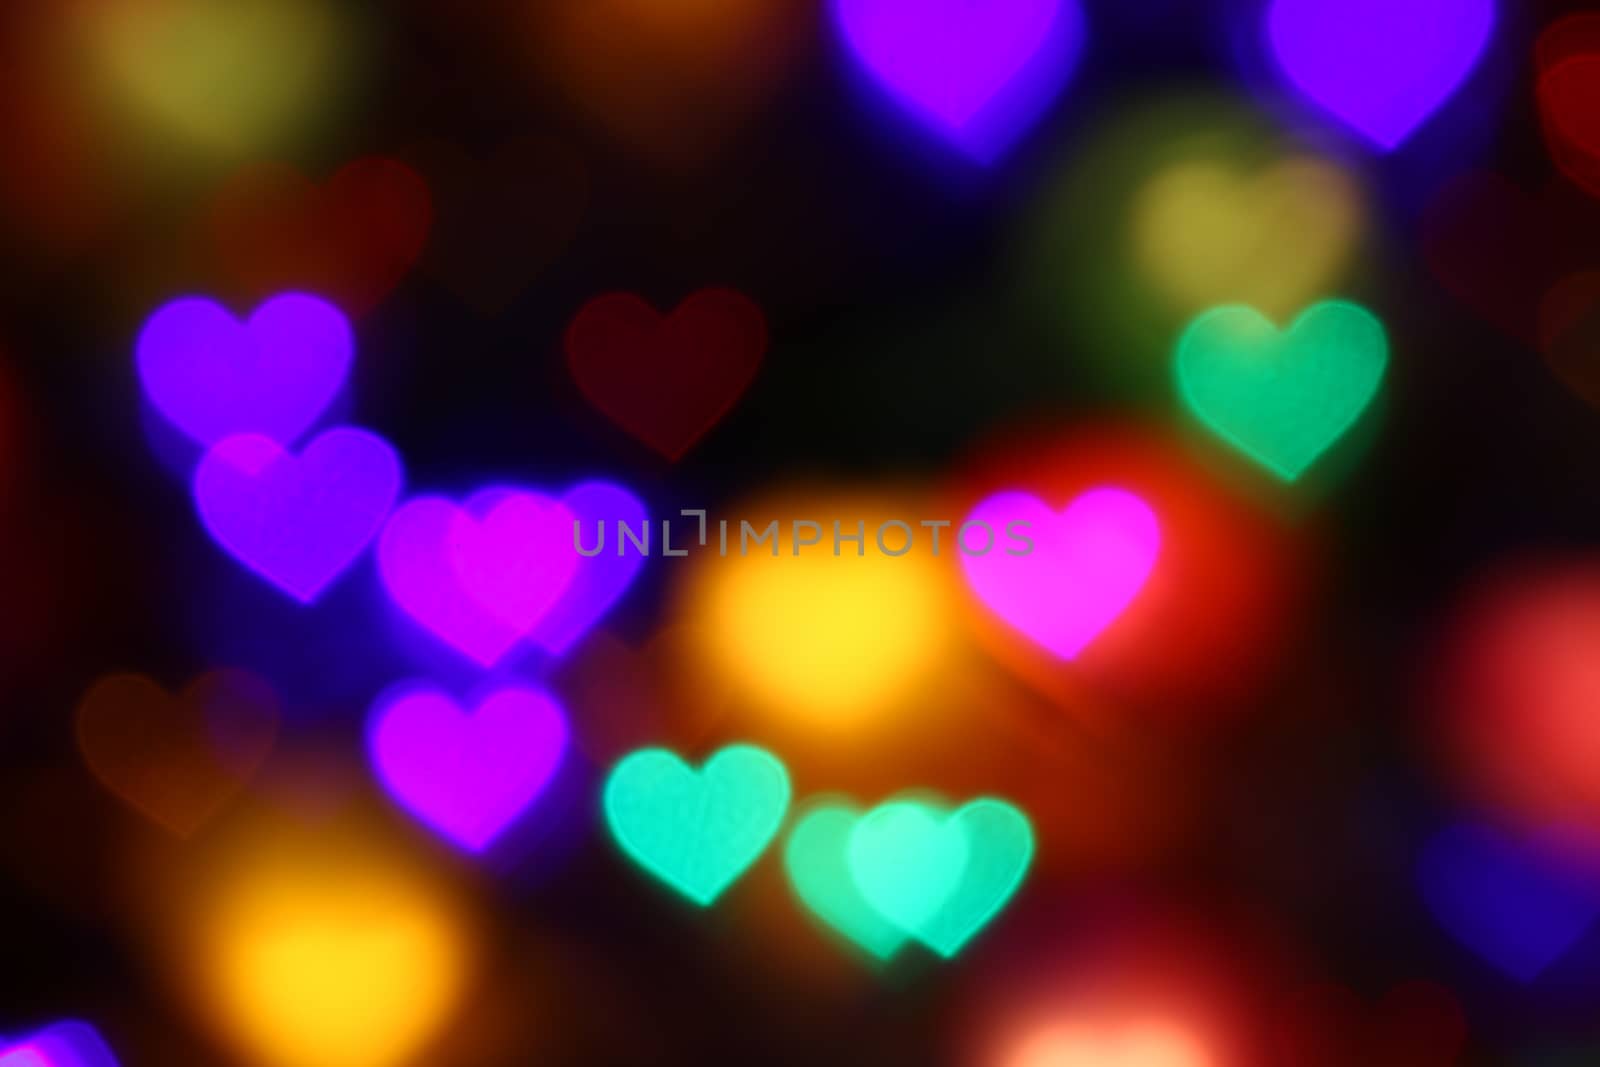 Valentines Colorful heart-shaped bokeh on black background lighting bokeh for decoration at night backdrop wallpaper blur valentine, Love Pictures background, Lighting heart shaped soft night abstract